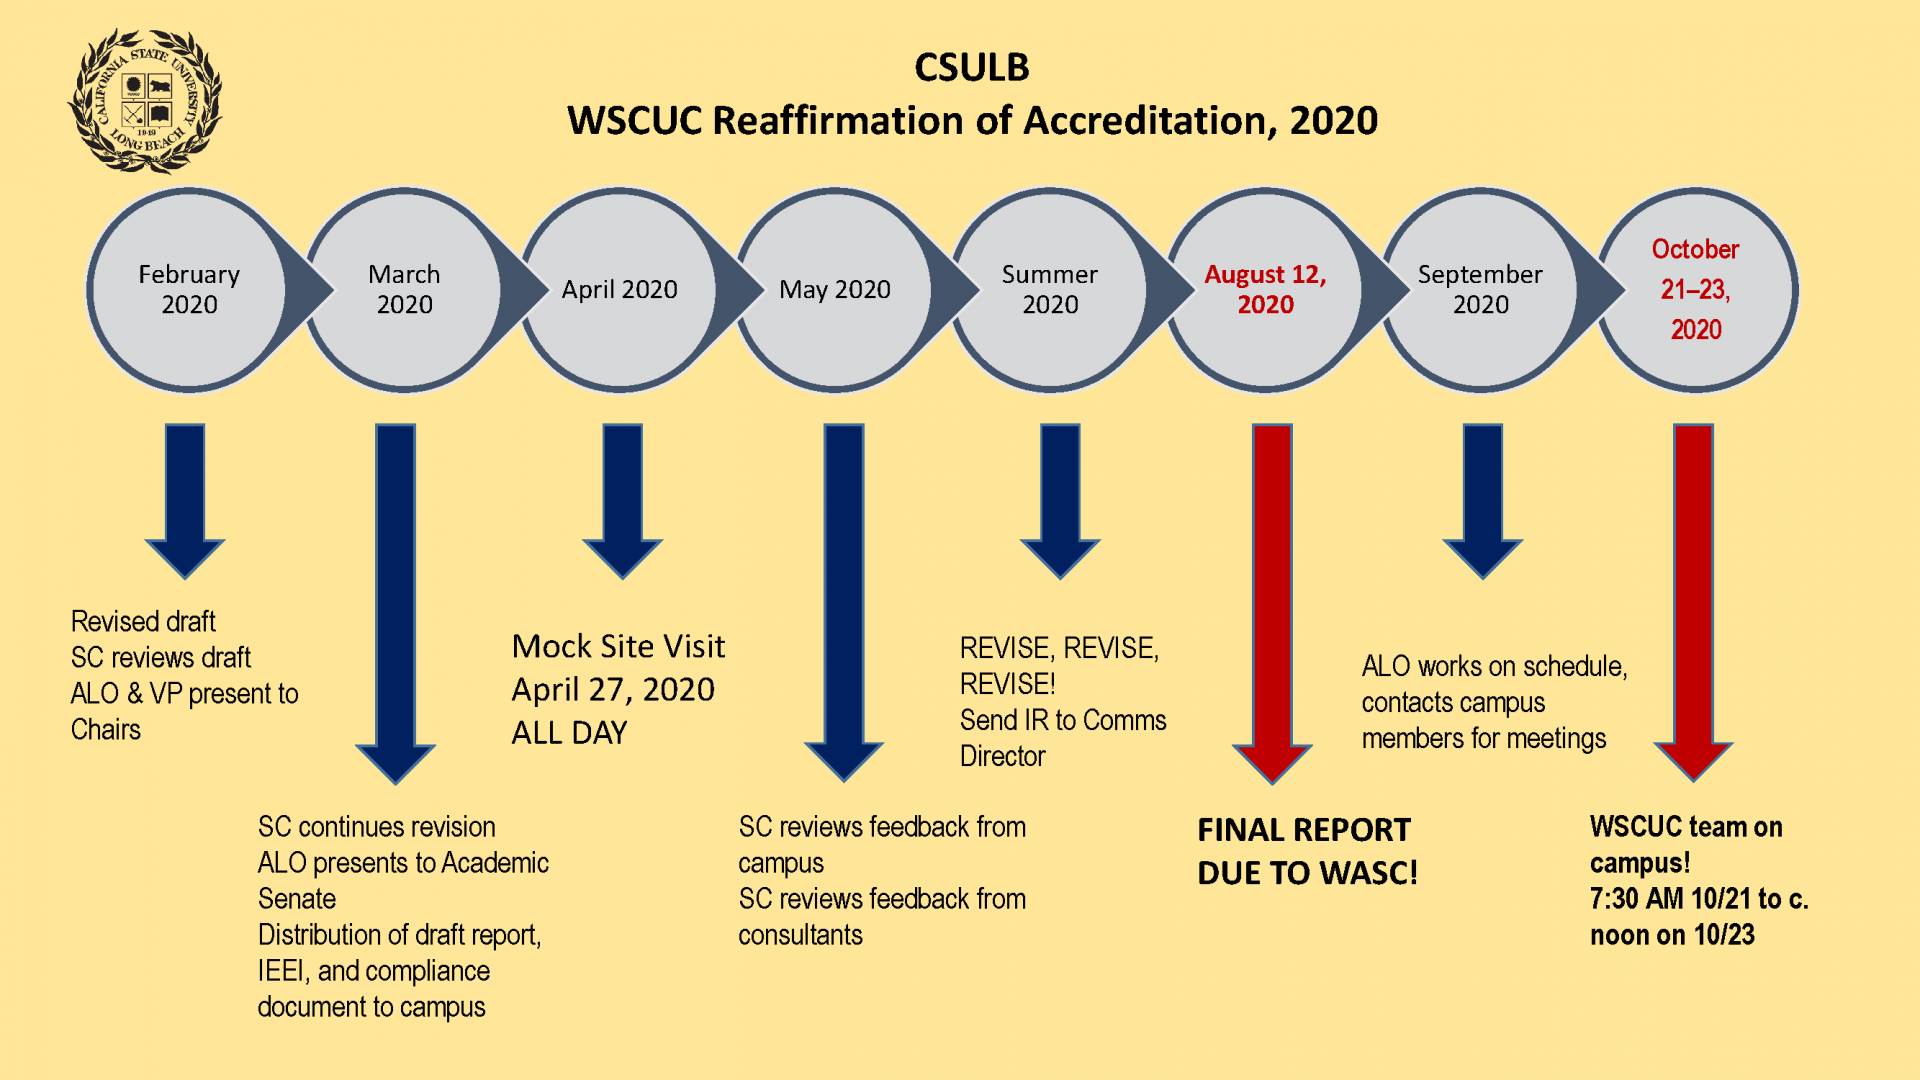 2019 to 2020 Timeline of CSULB WSCUC Reaffirmation of Accred